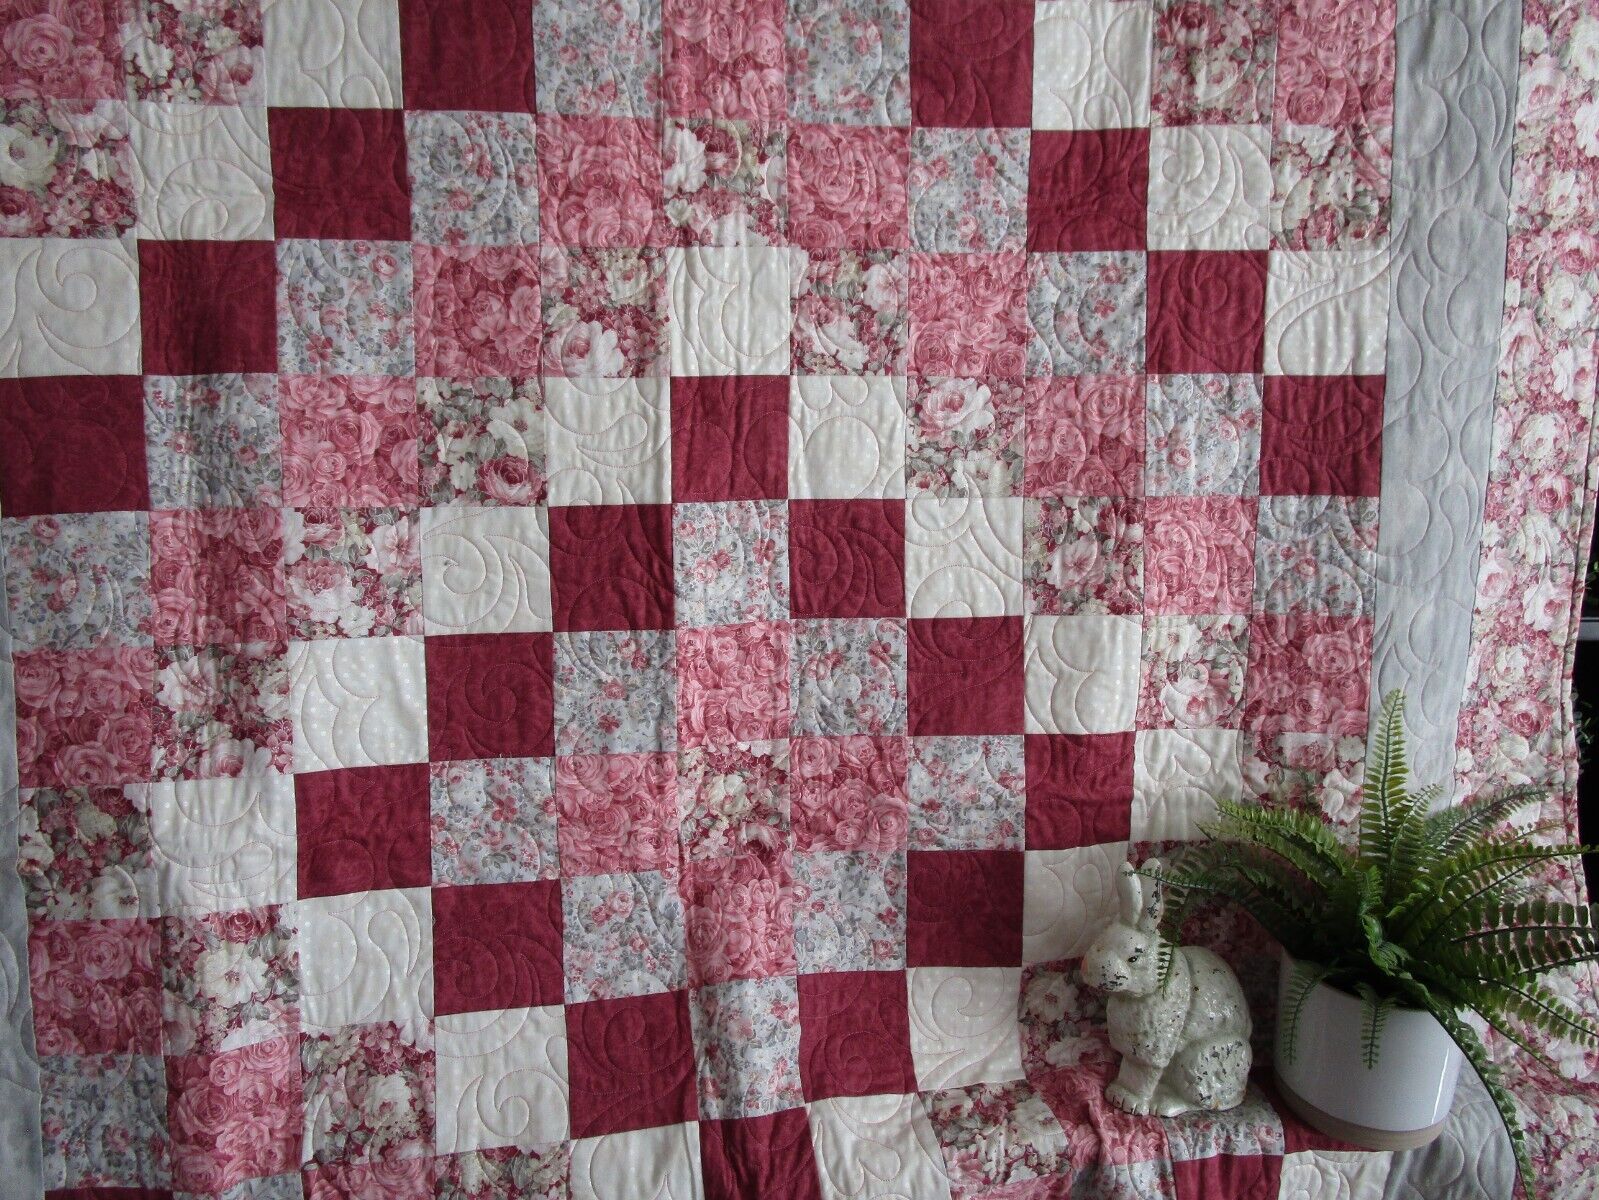 Vintage LOOK PATCHWORK Quilt, HANDMADE, 60 X 74, FLORAL ROSE, GRAY, NEW